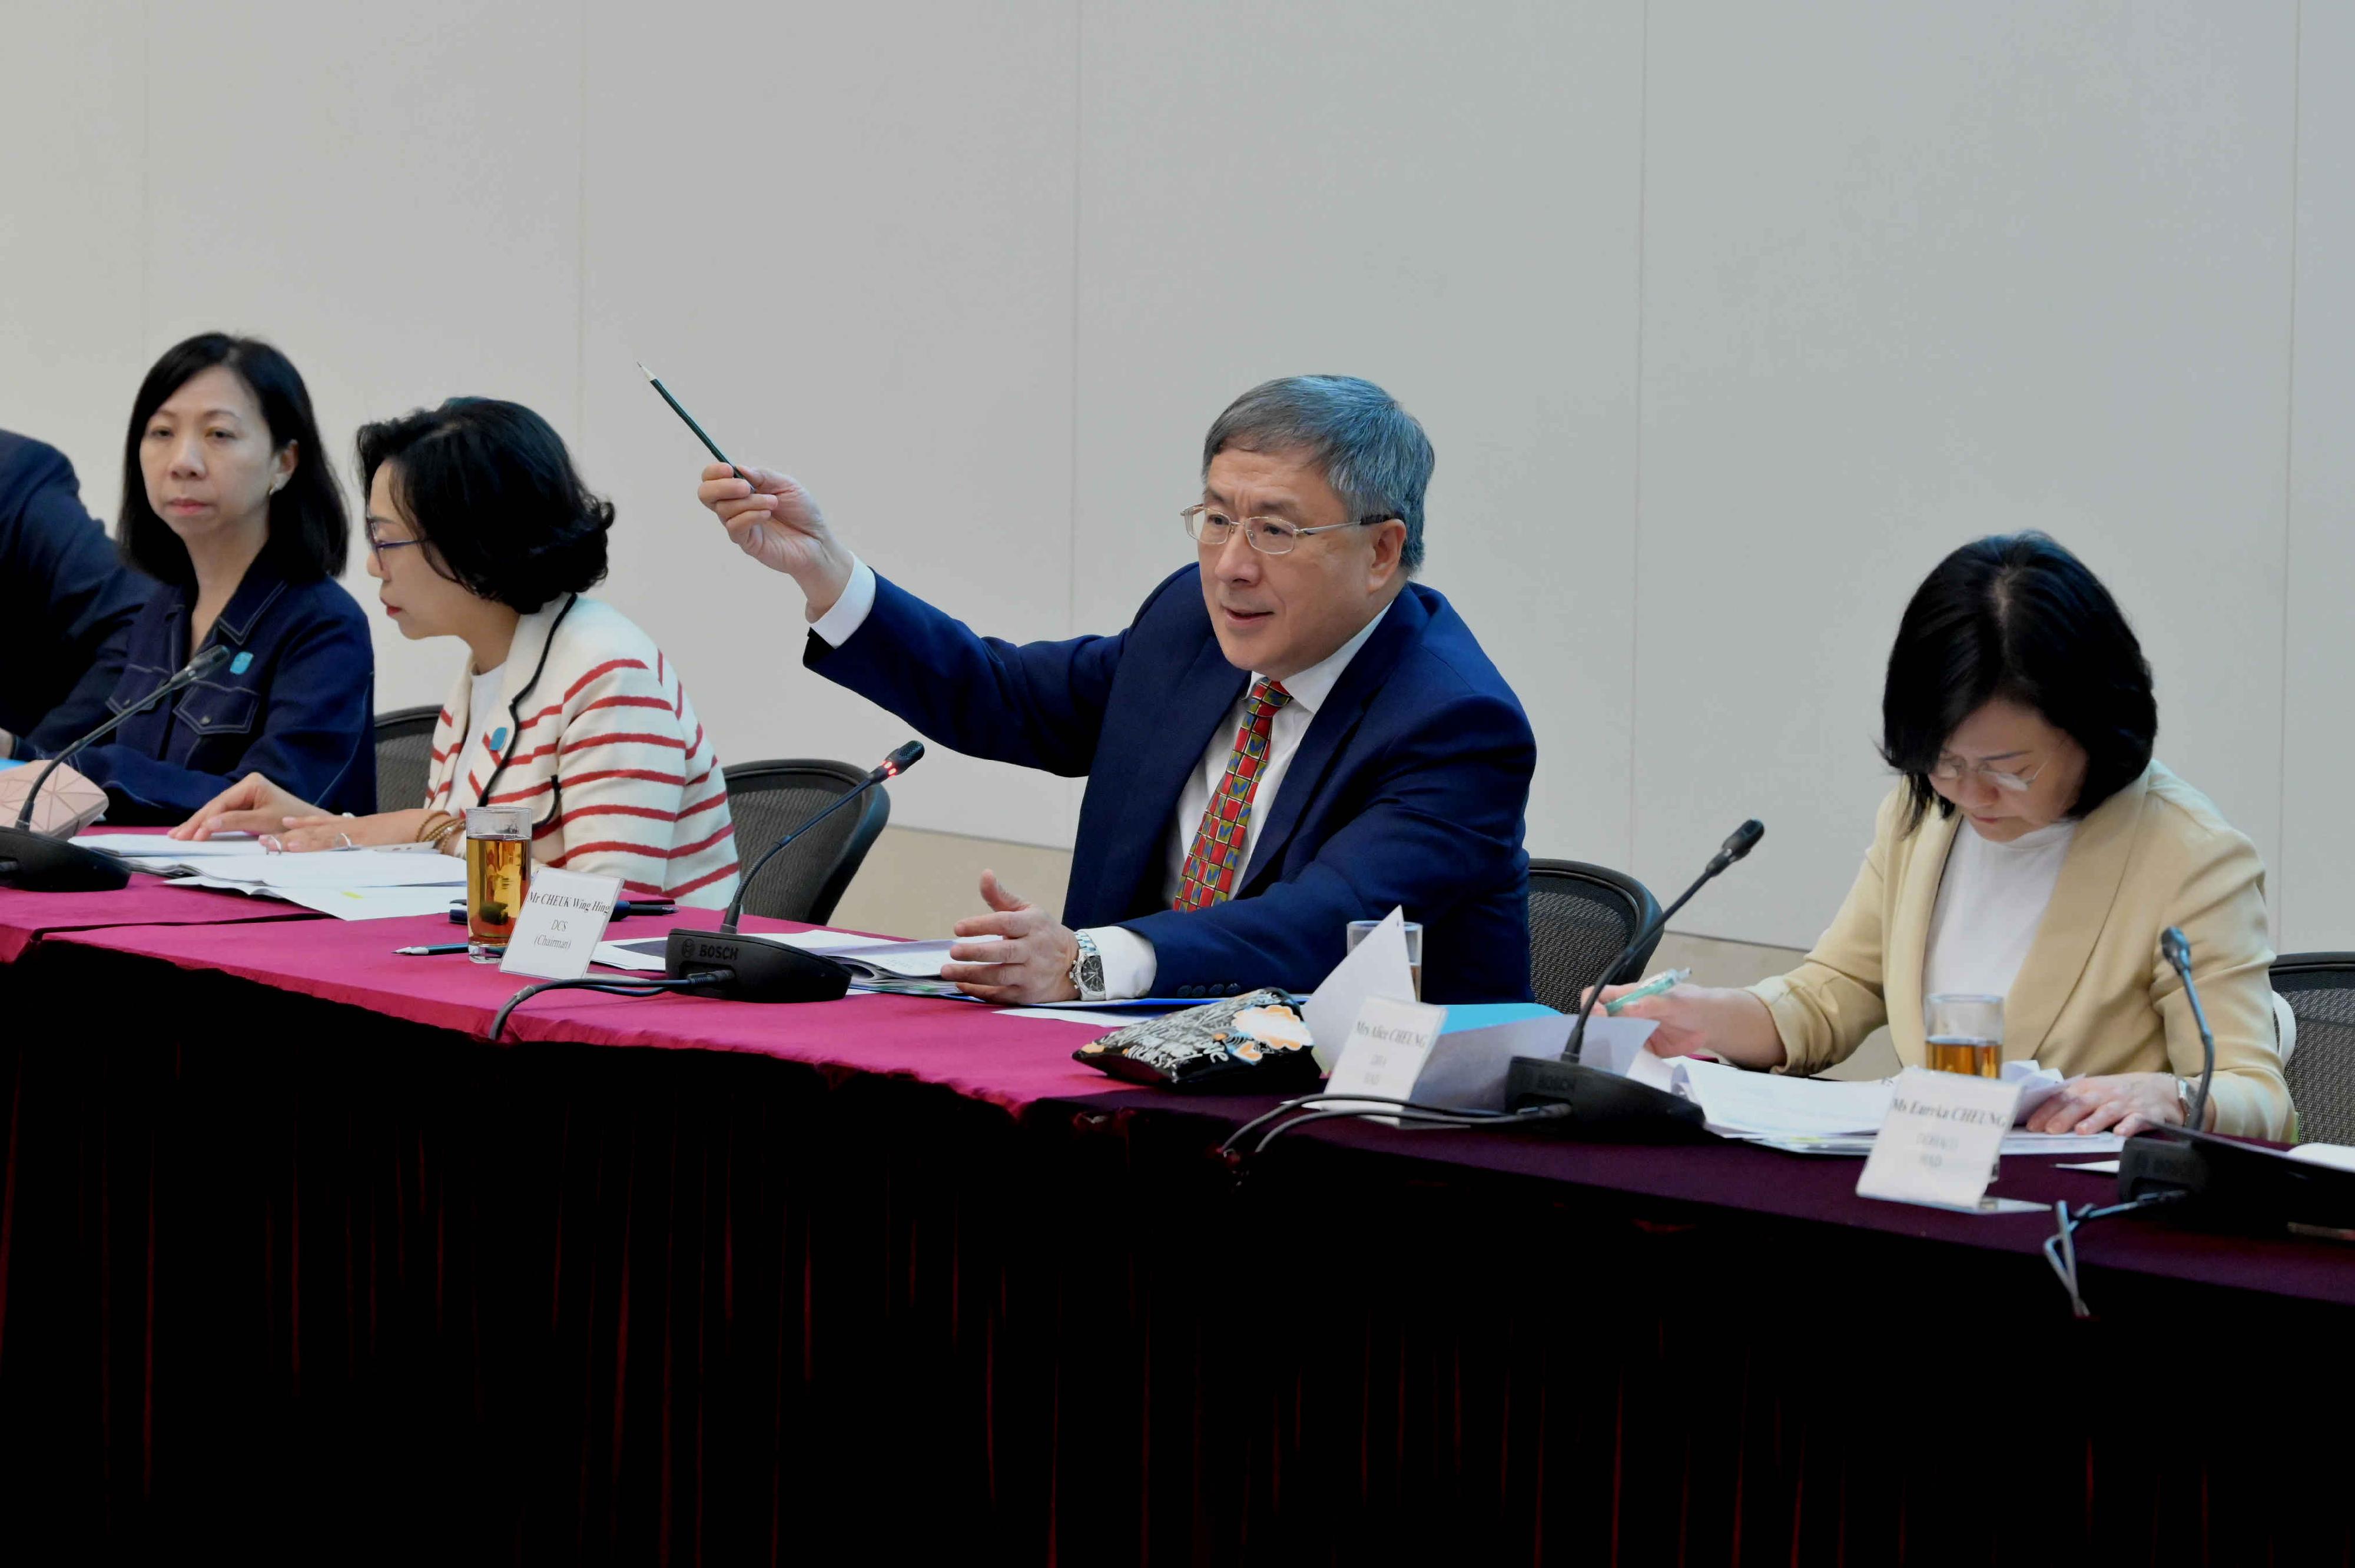 The Deputy Chief Secretary for Administration, Mr Cheuk Wing-hing (second right), urges departments to discharge good governance with various district initiatives of community interests to continuously enhance governance efficacy at the district level, at the fourth meeting of the Task Force on District Governance today (April 29).